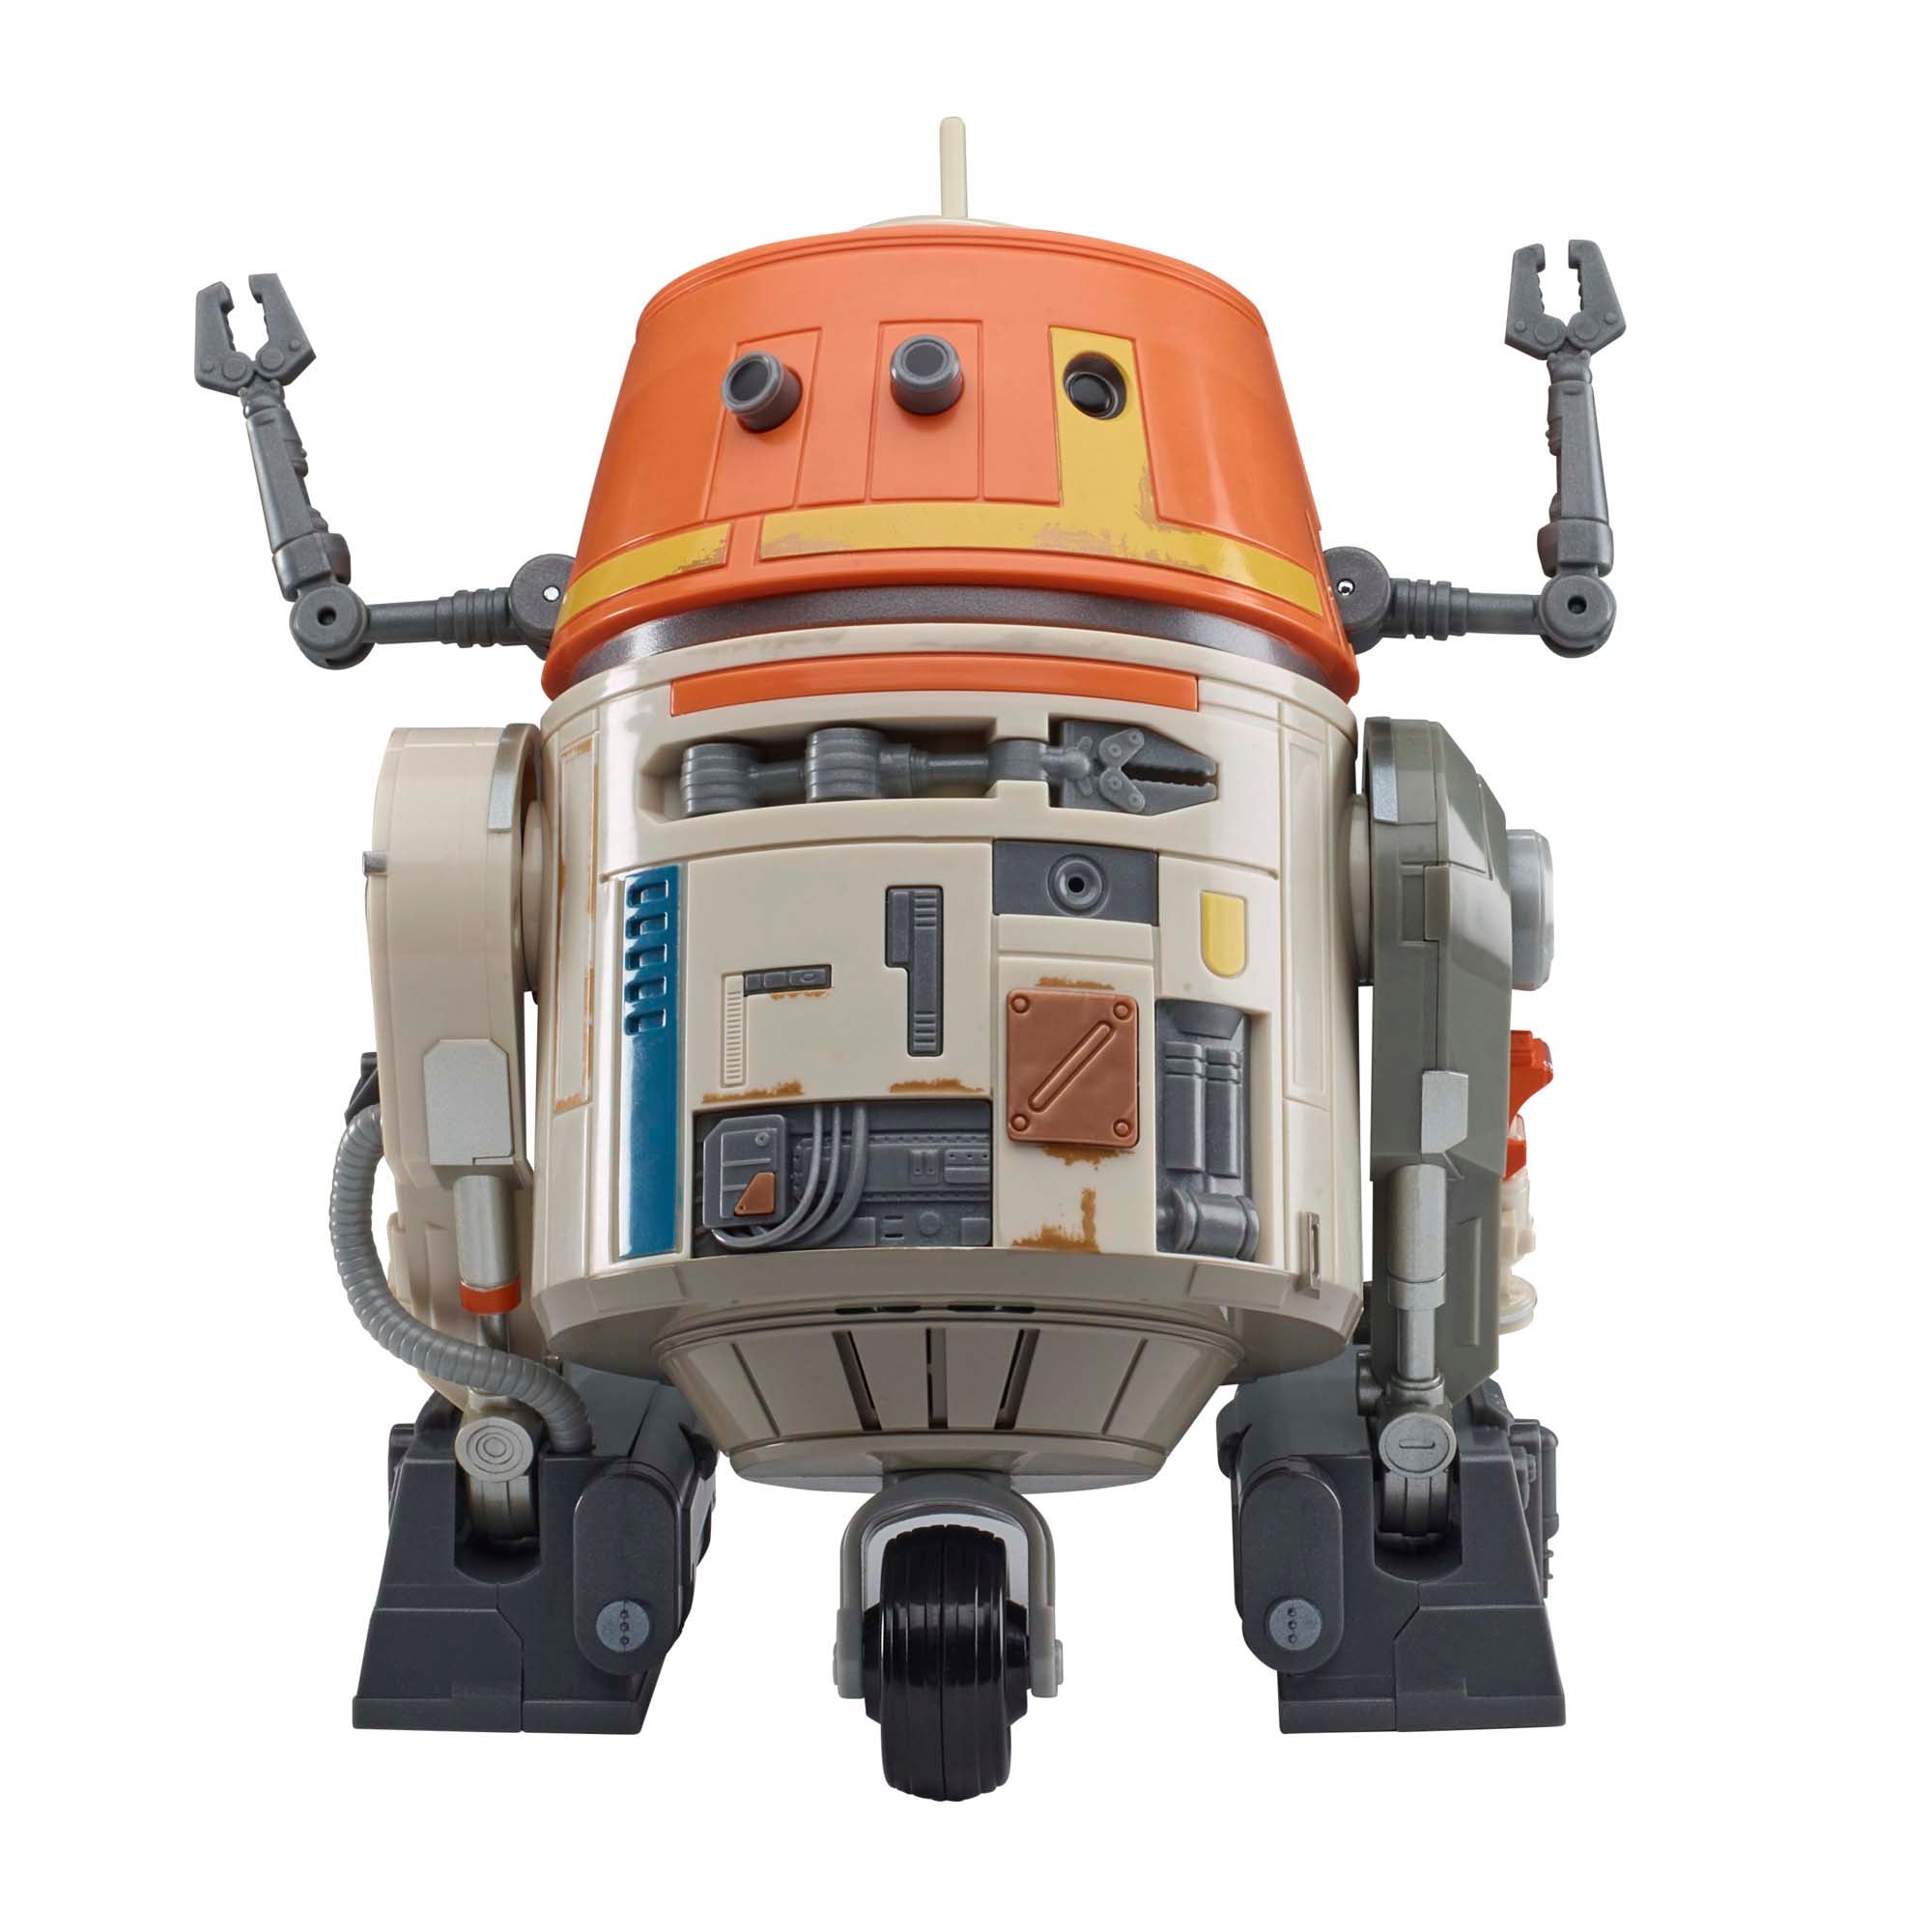 Sell Star Wars Toys Online at Sell Your Toys Now! - Sell Your Toys Now